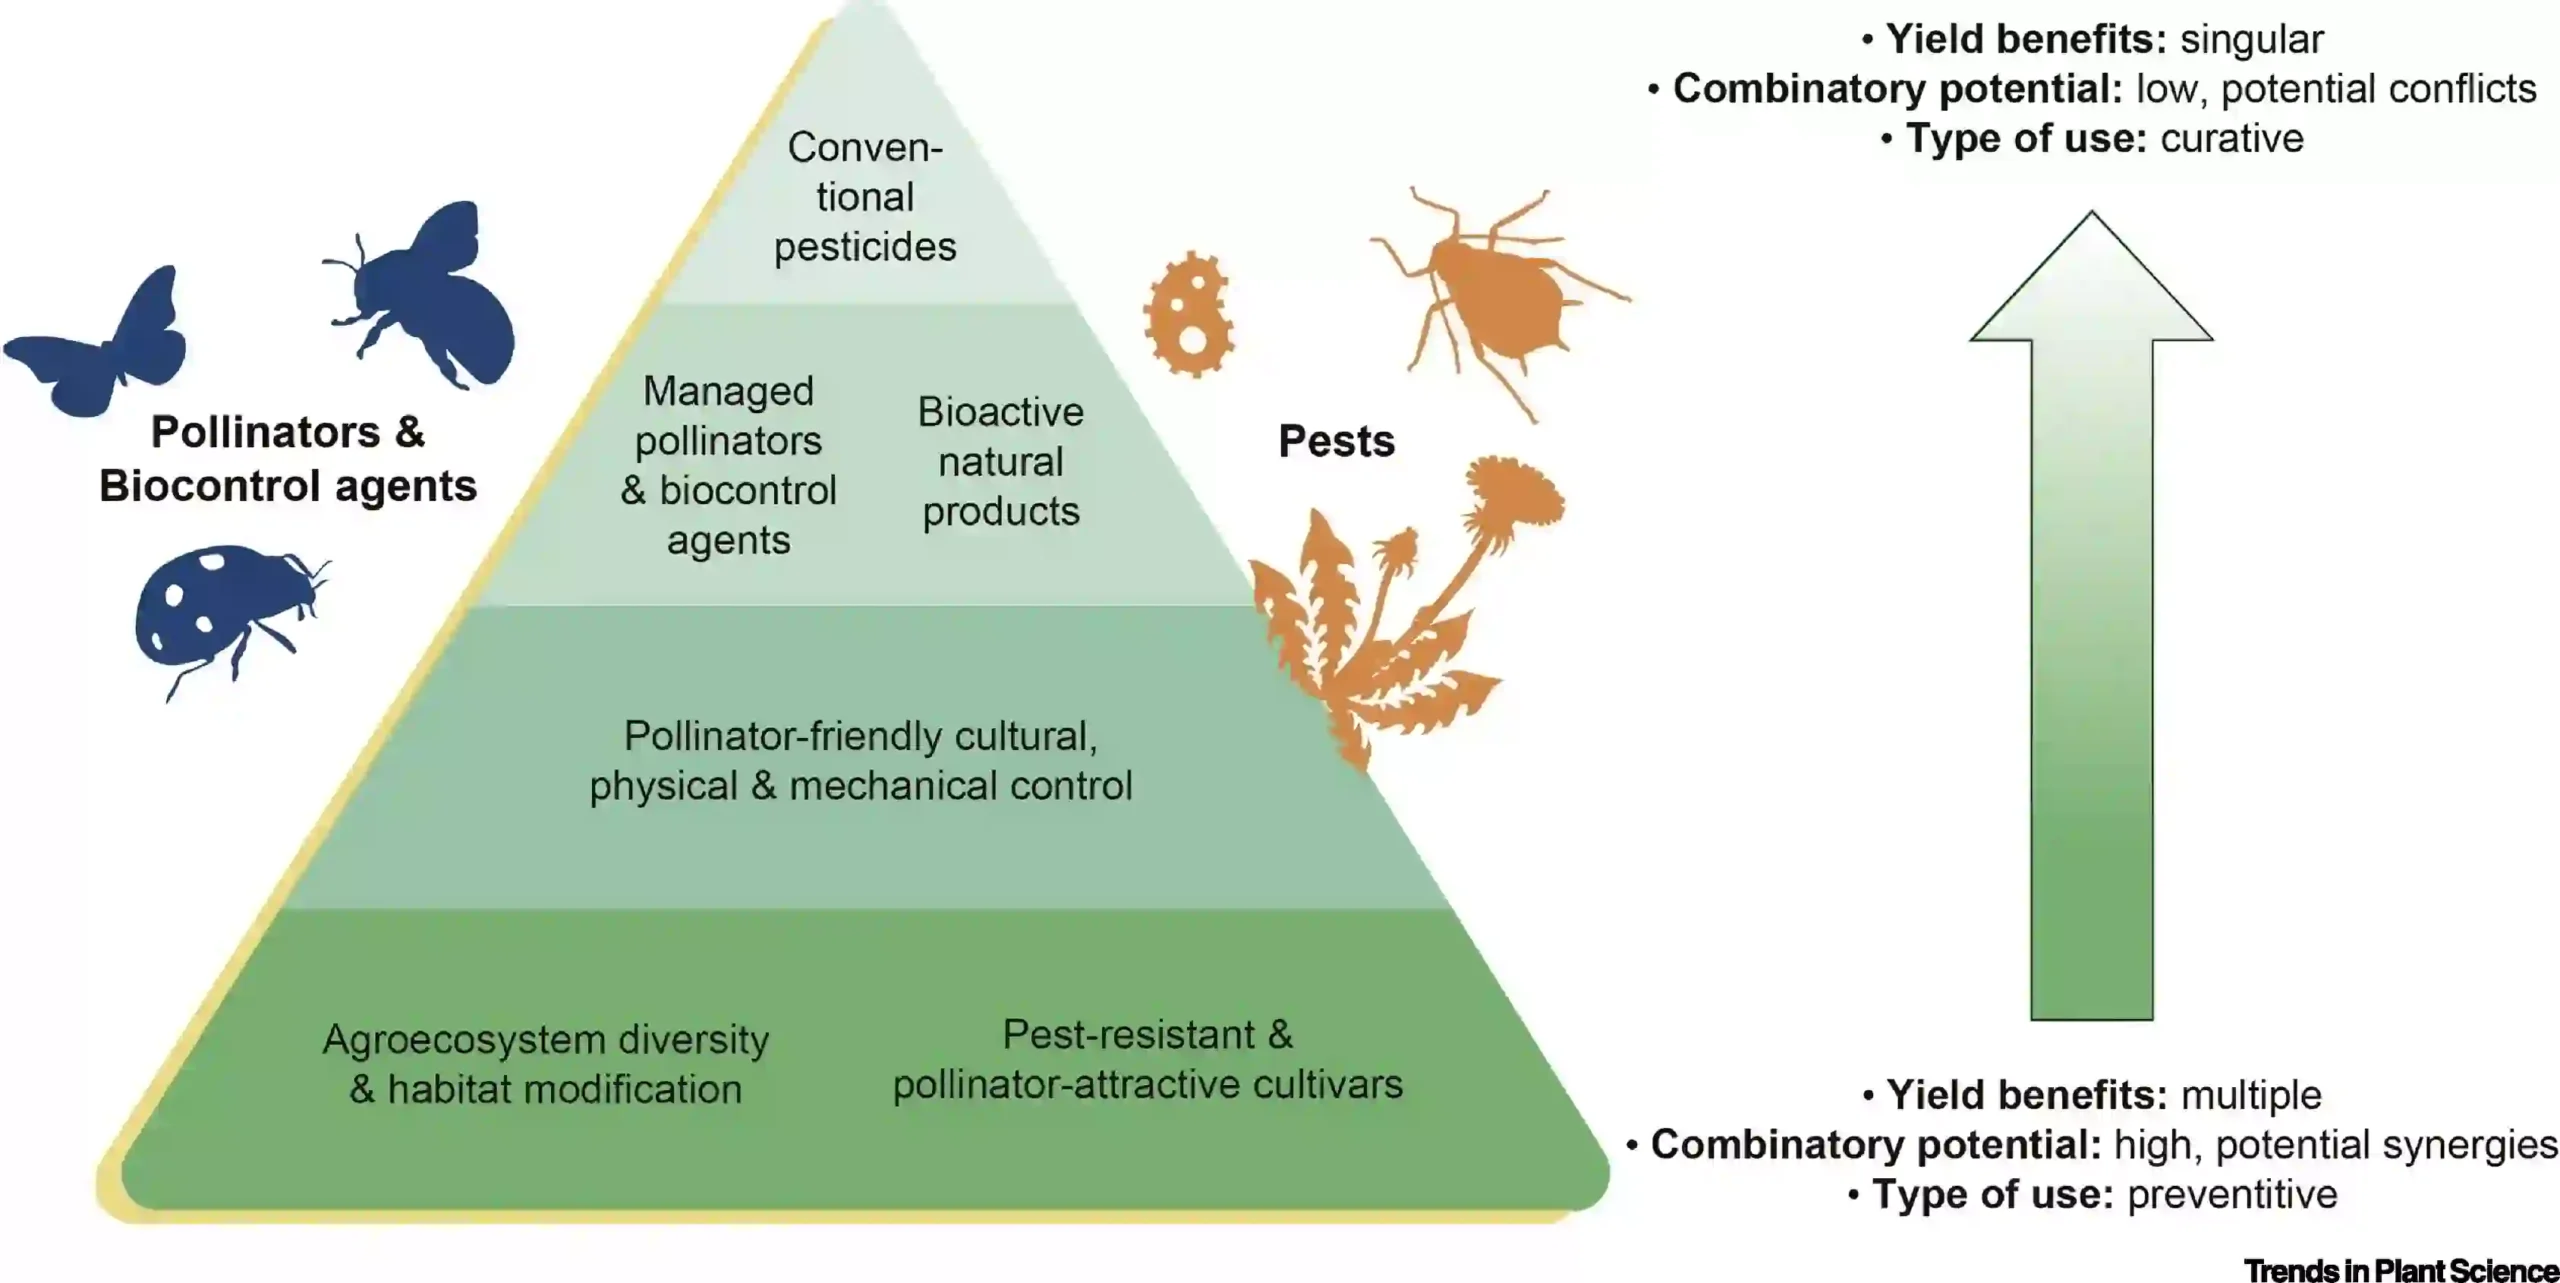 Effects of Pesticides on Pollinators and Ecological Balance